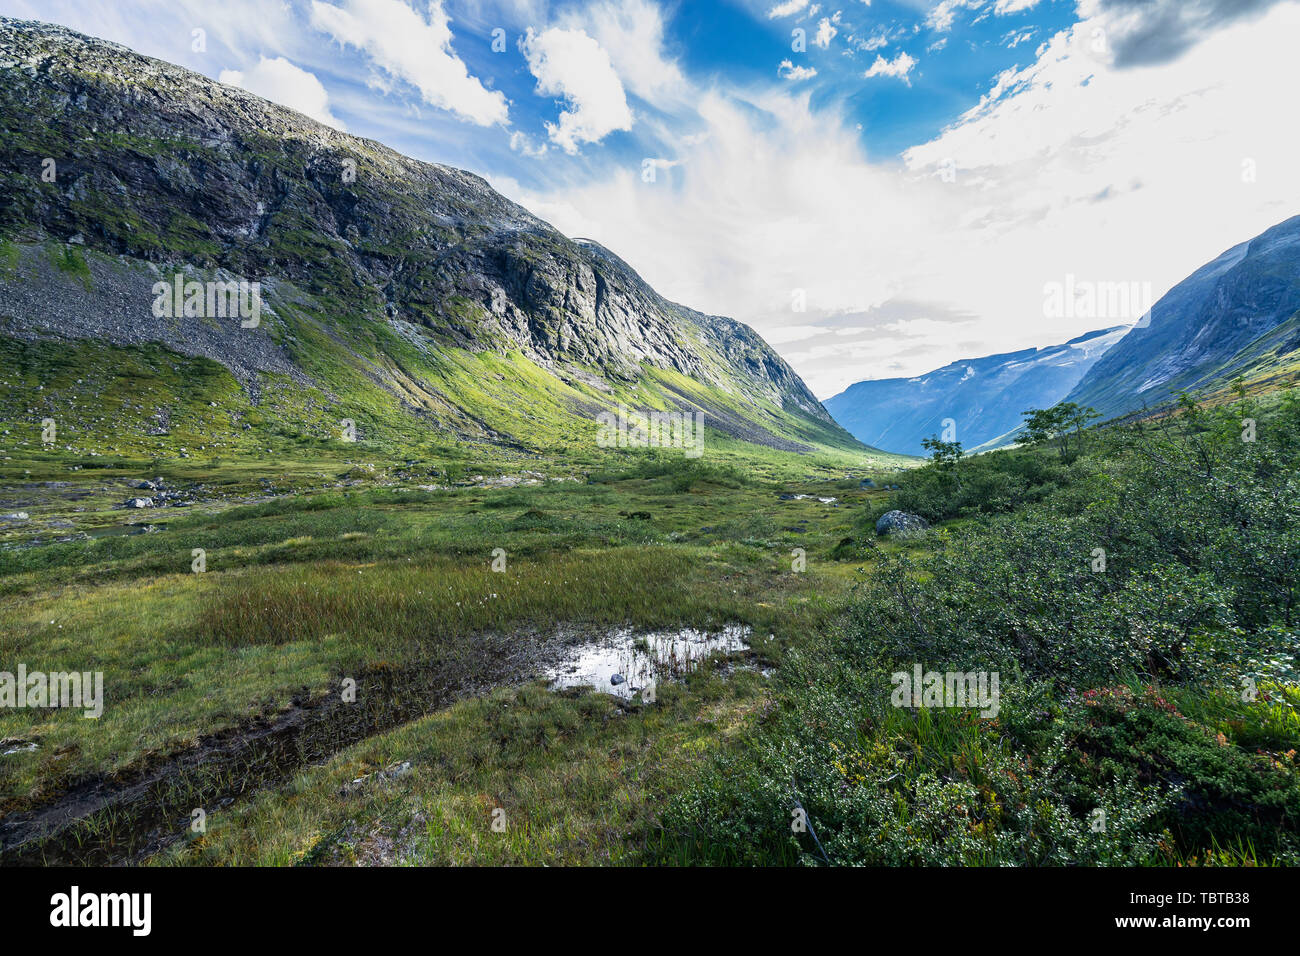 Landscape and nature at the upper part of the Valldalen Valley towards Trollstigen, Sunnmore, More og Romsdal, Norway Stock Photo